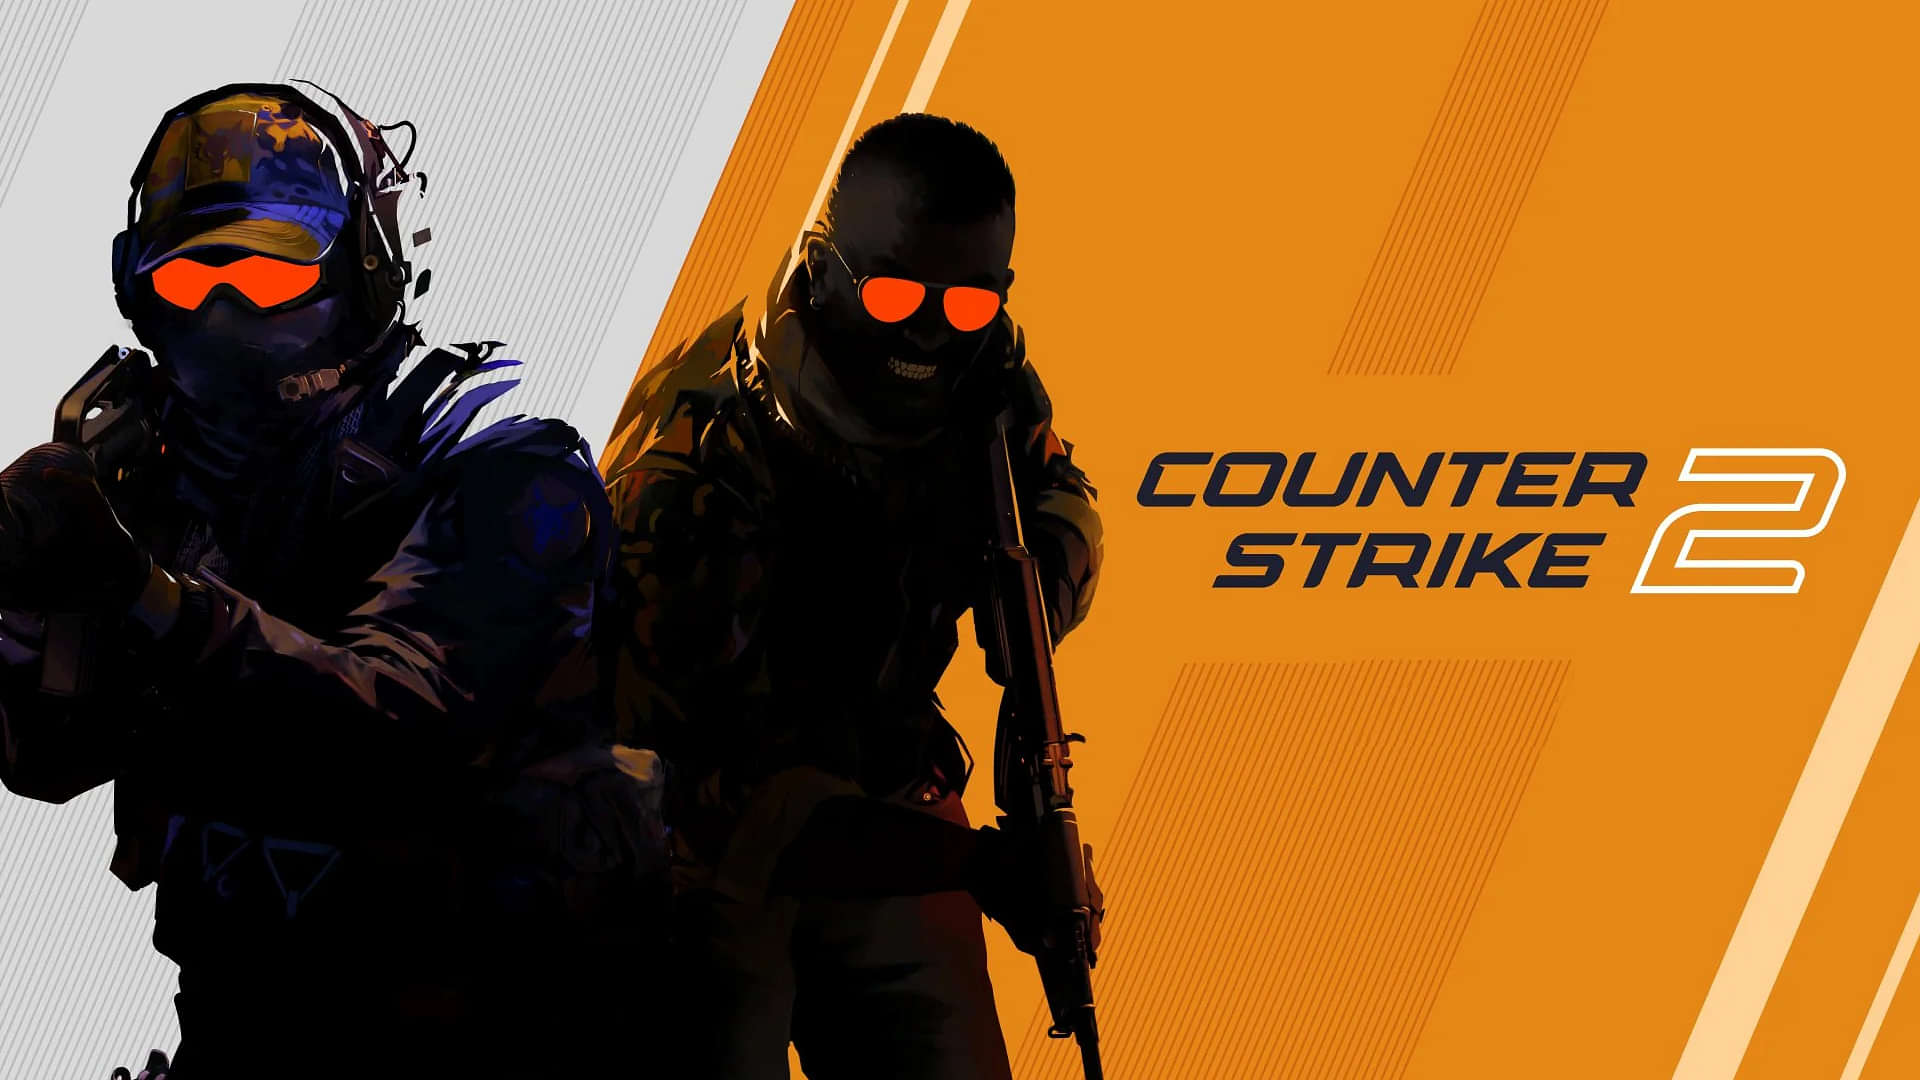 CS:GO' update suggests 'Counter-Strike 2' launch is imminent